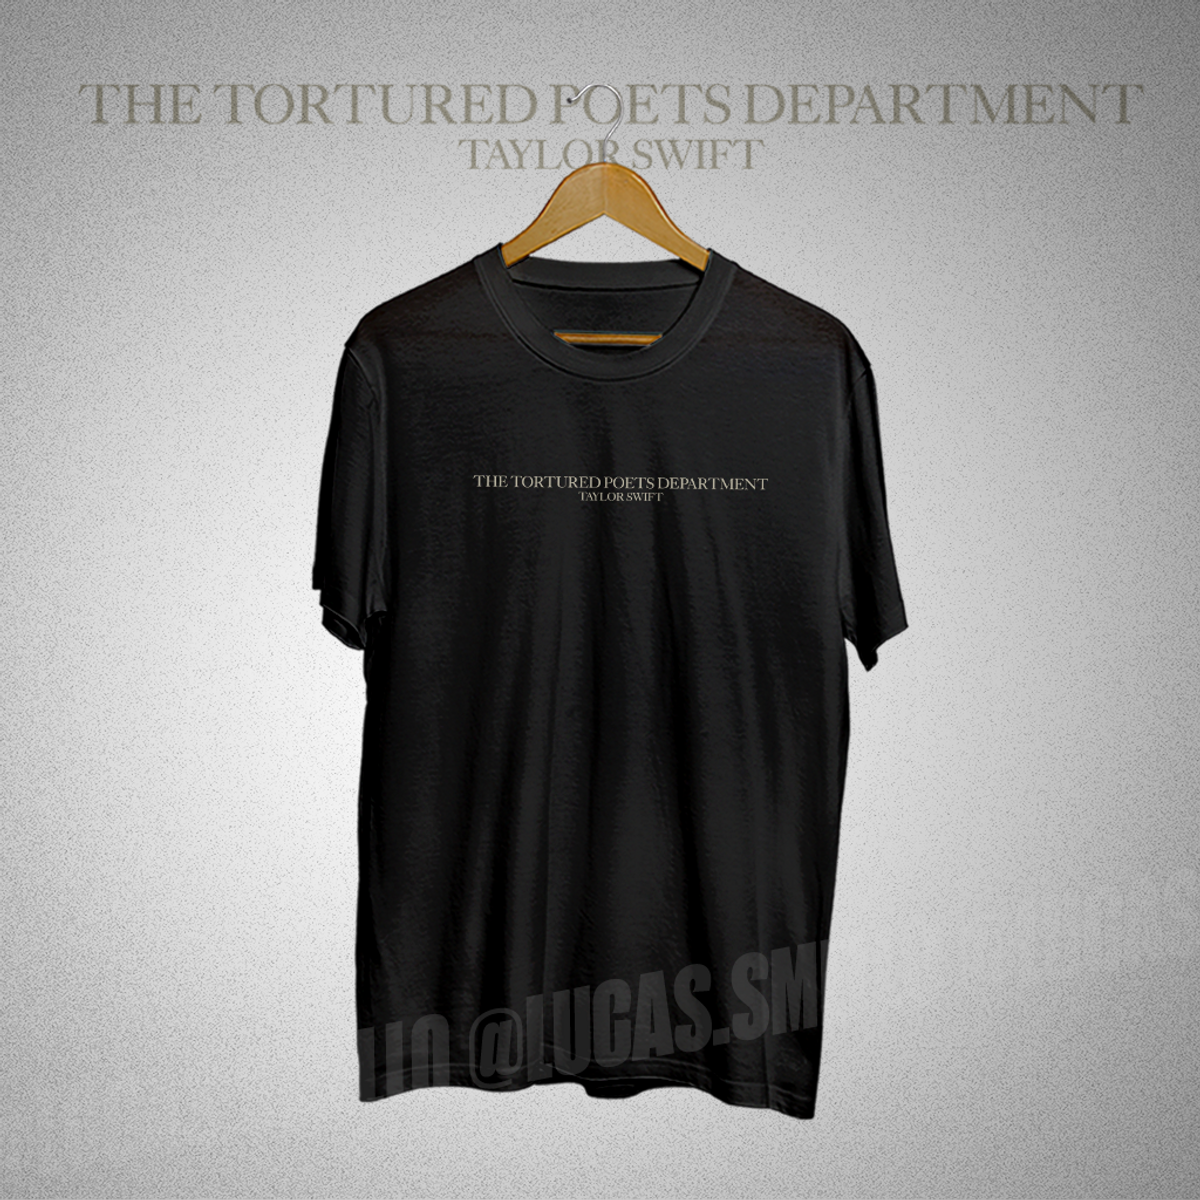 Nome do produto: Taylor Swift The Tortured Poets Department (TTPD)